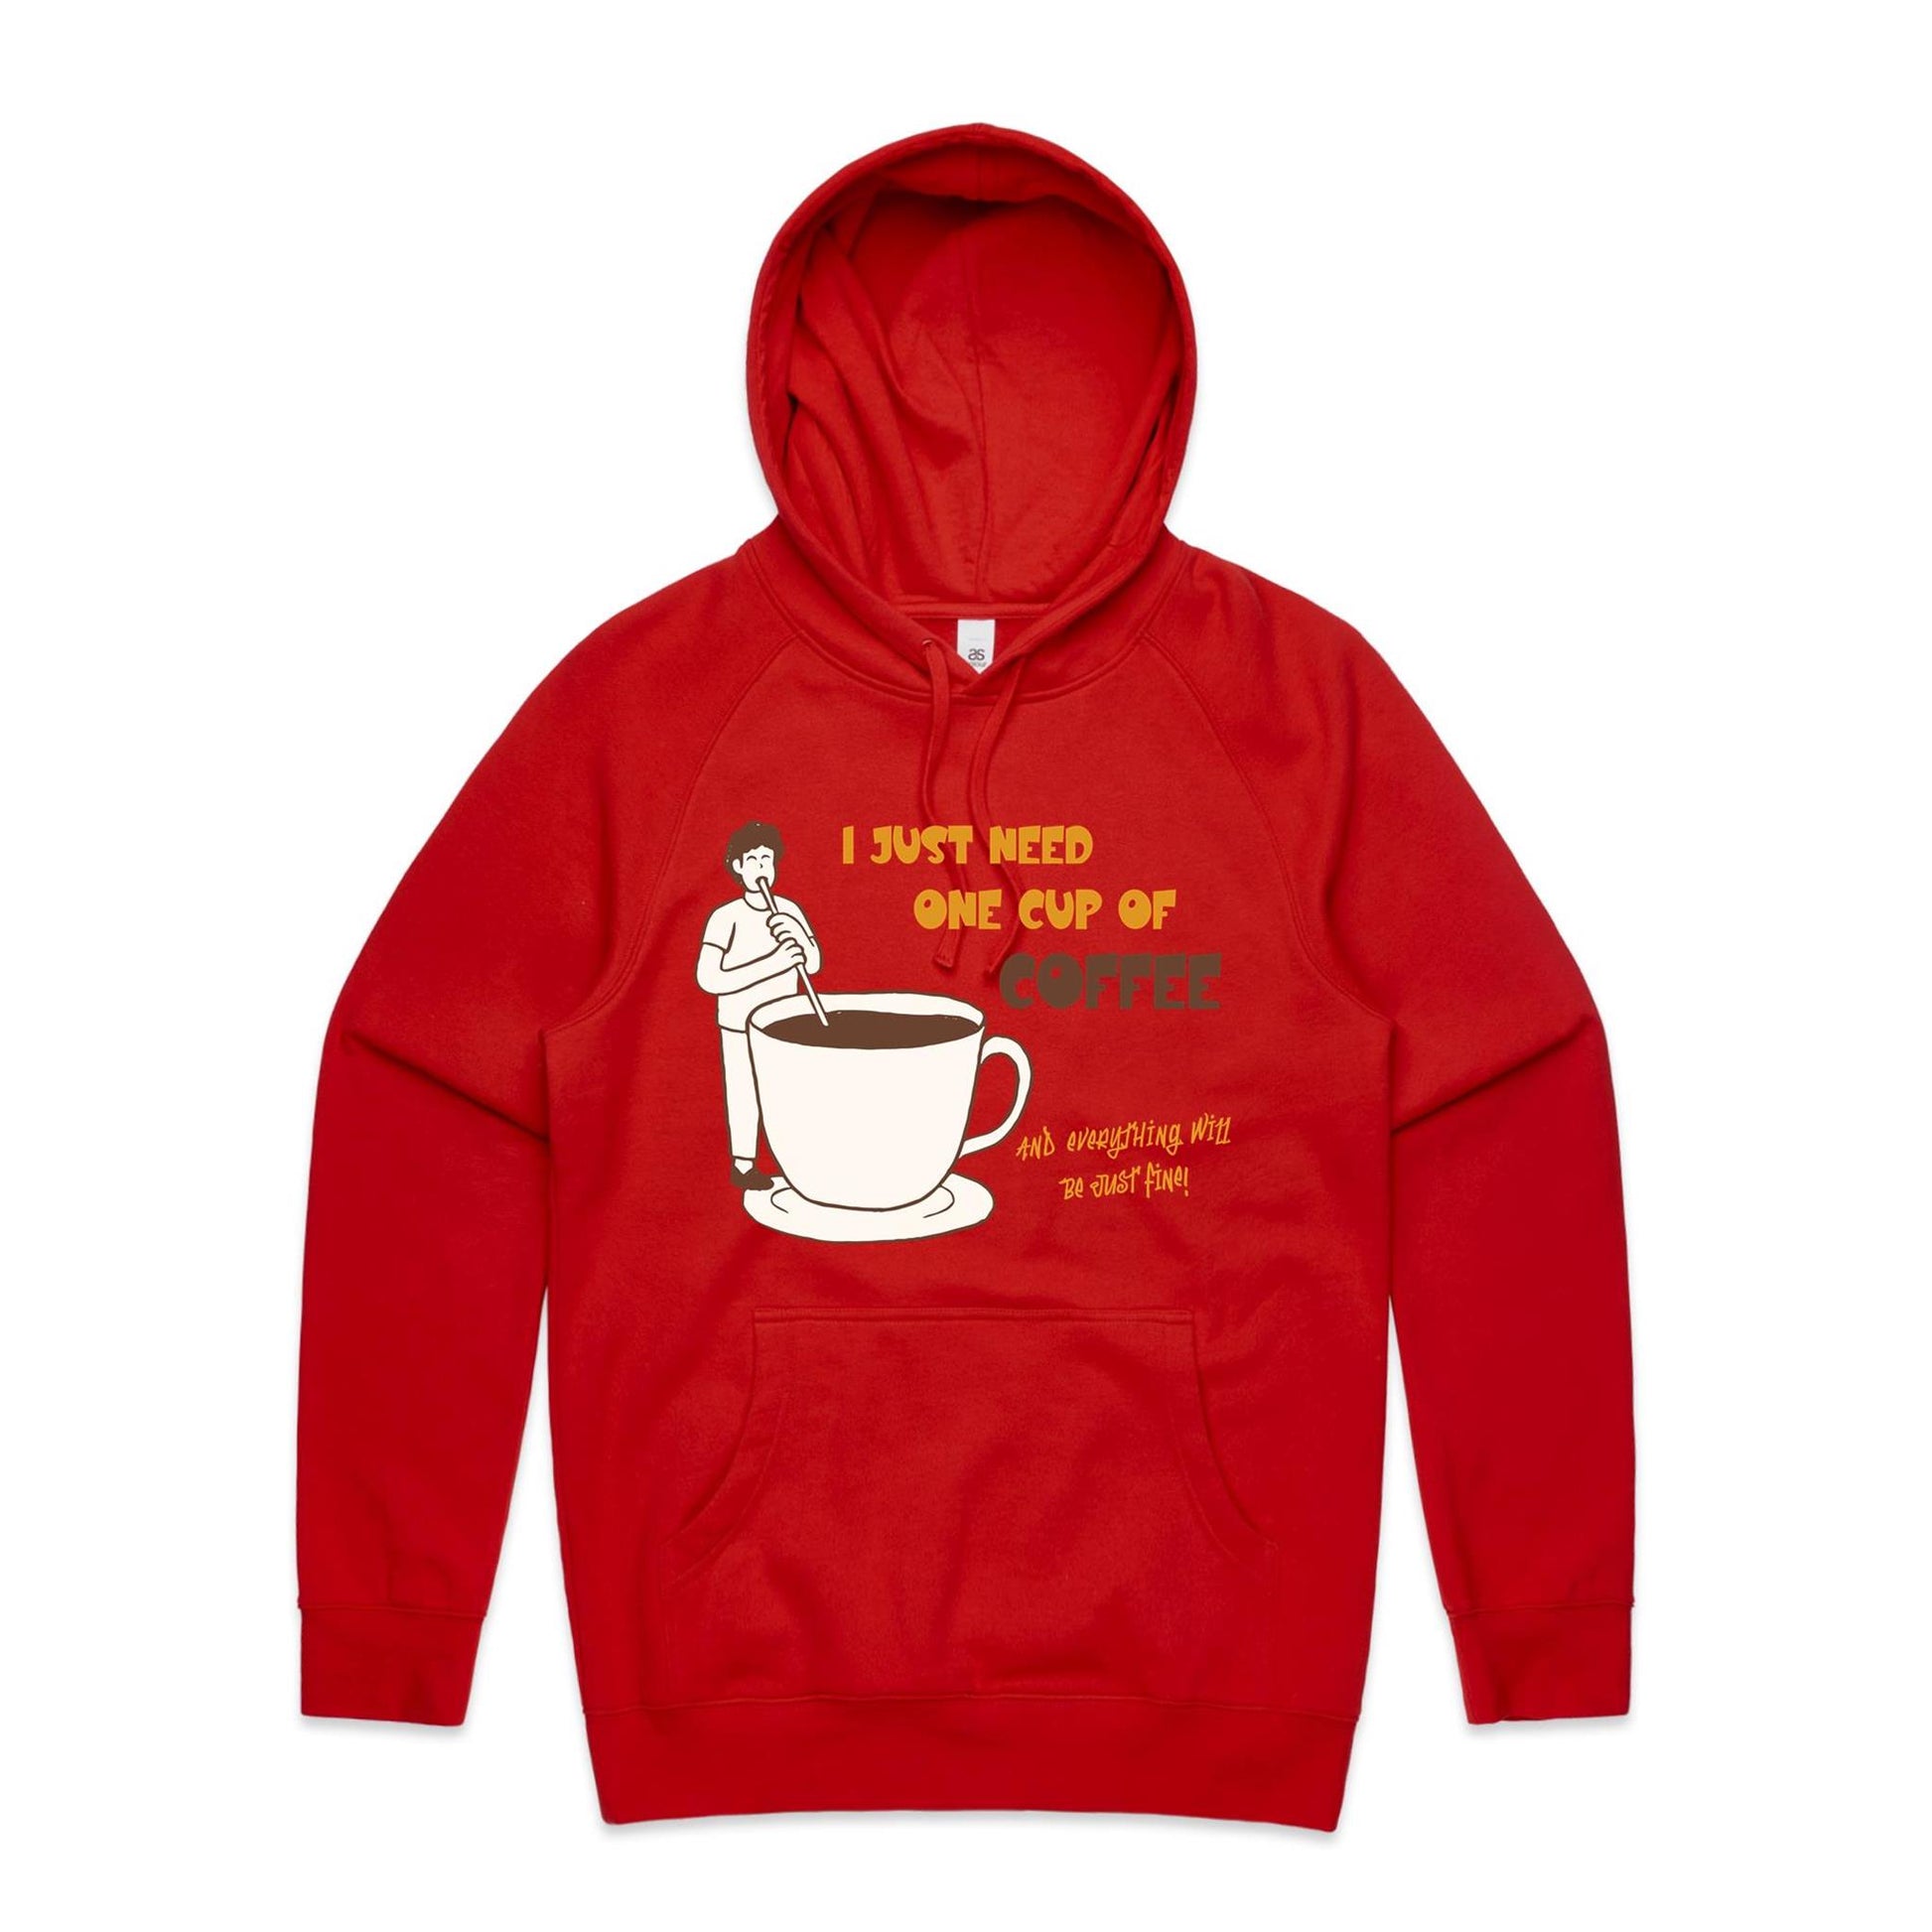 I Just Need One Cup Of Coffee And Everything Will Be Just Fine - Supply Hood Red Mens Supply Hoodie Coffee